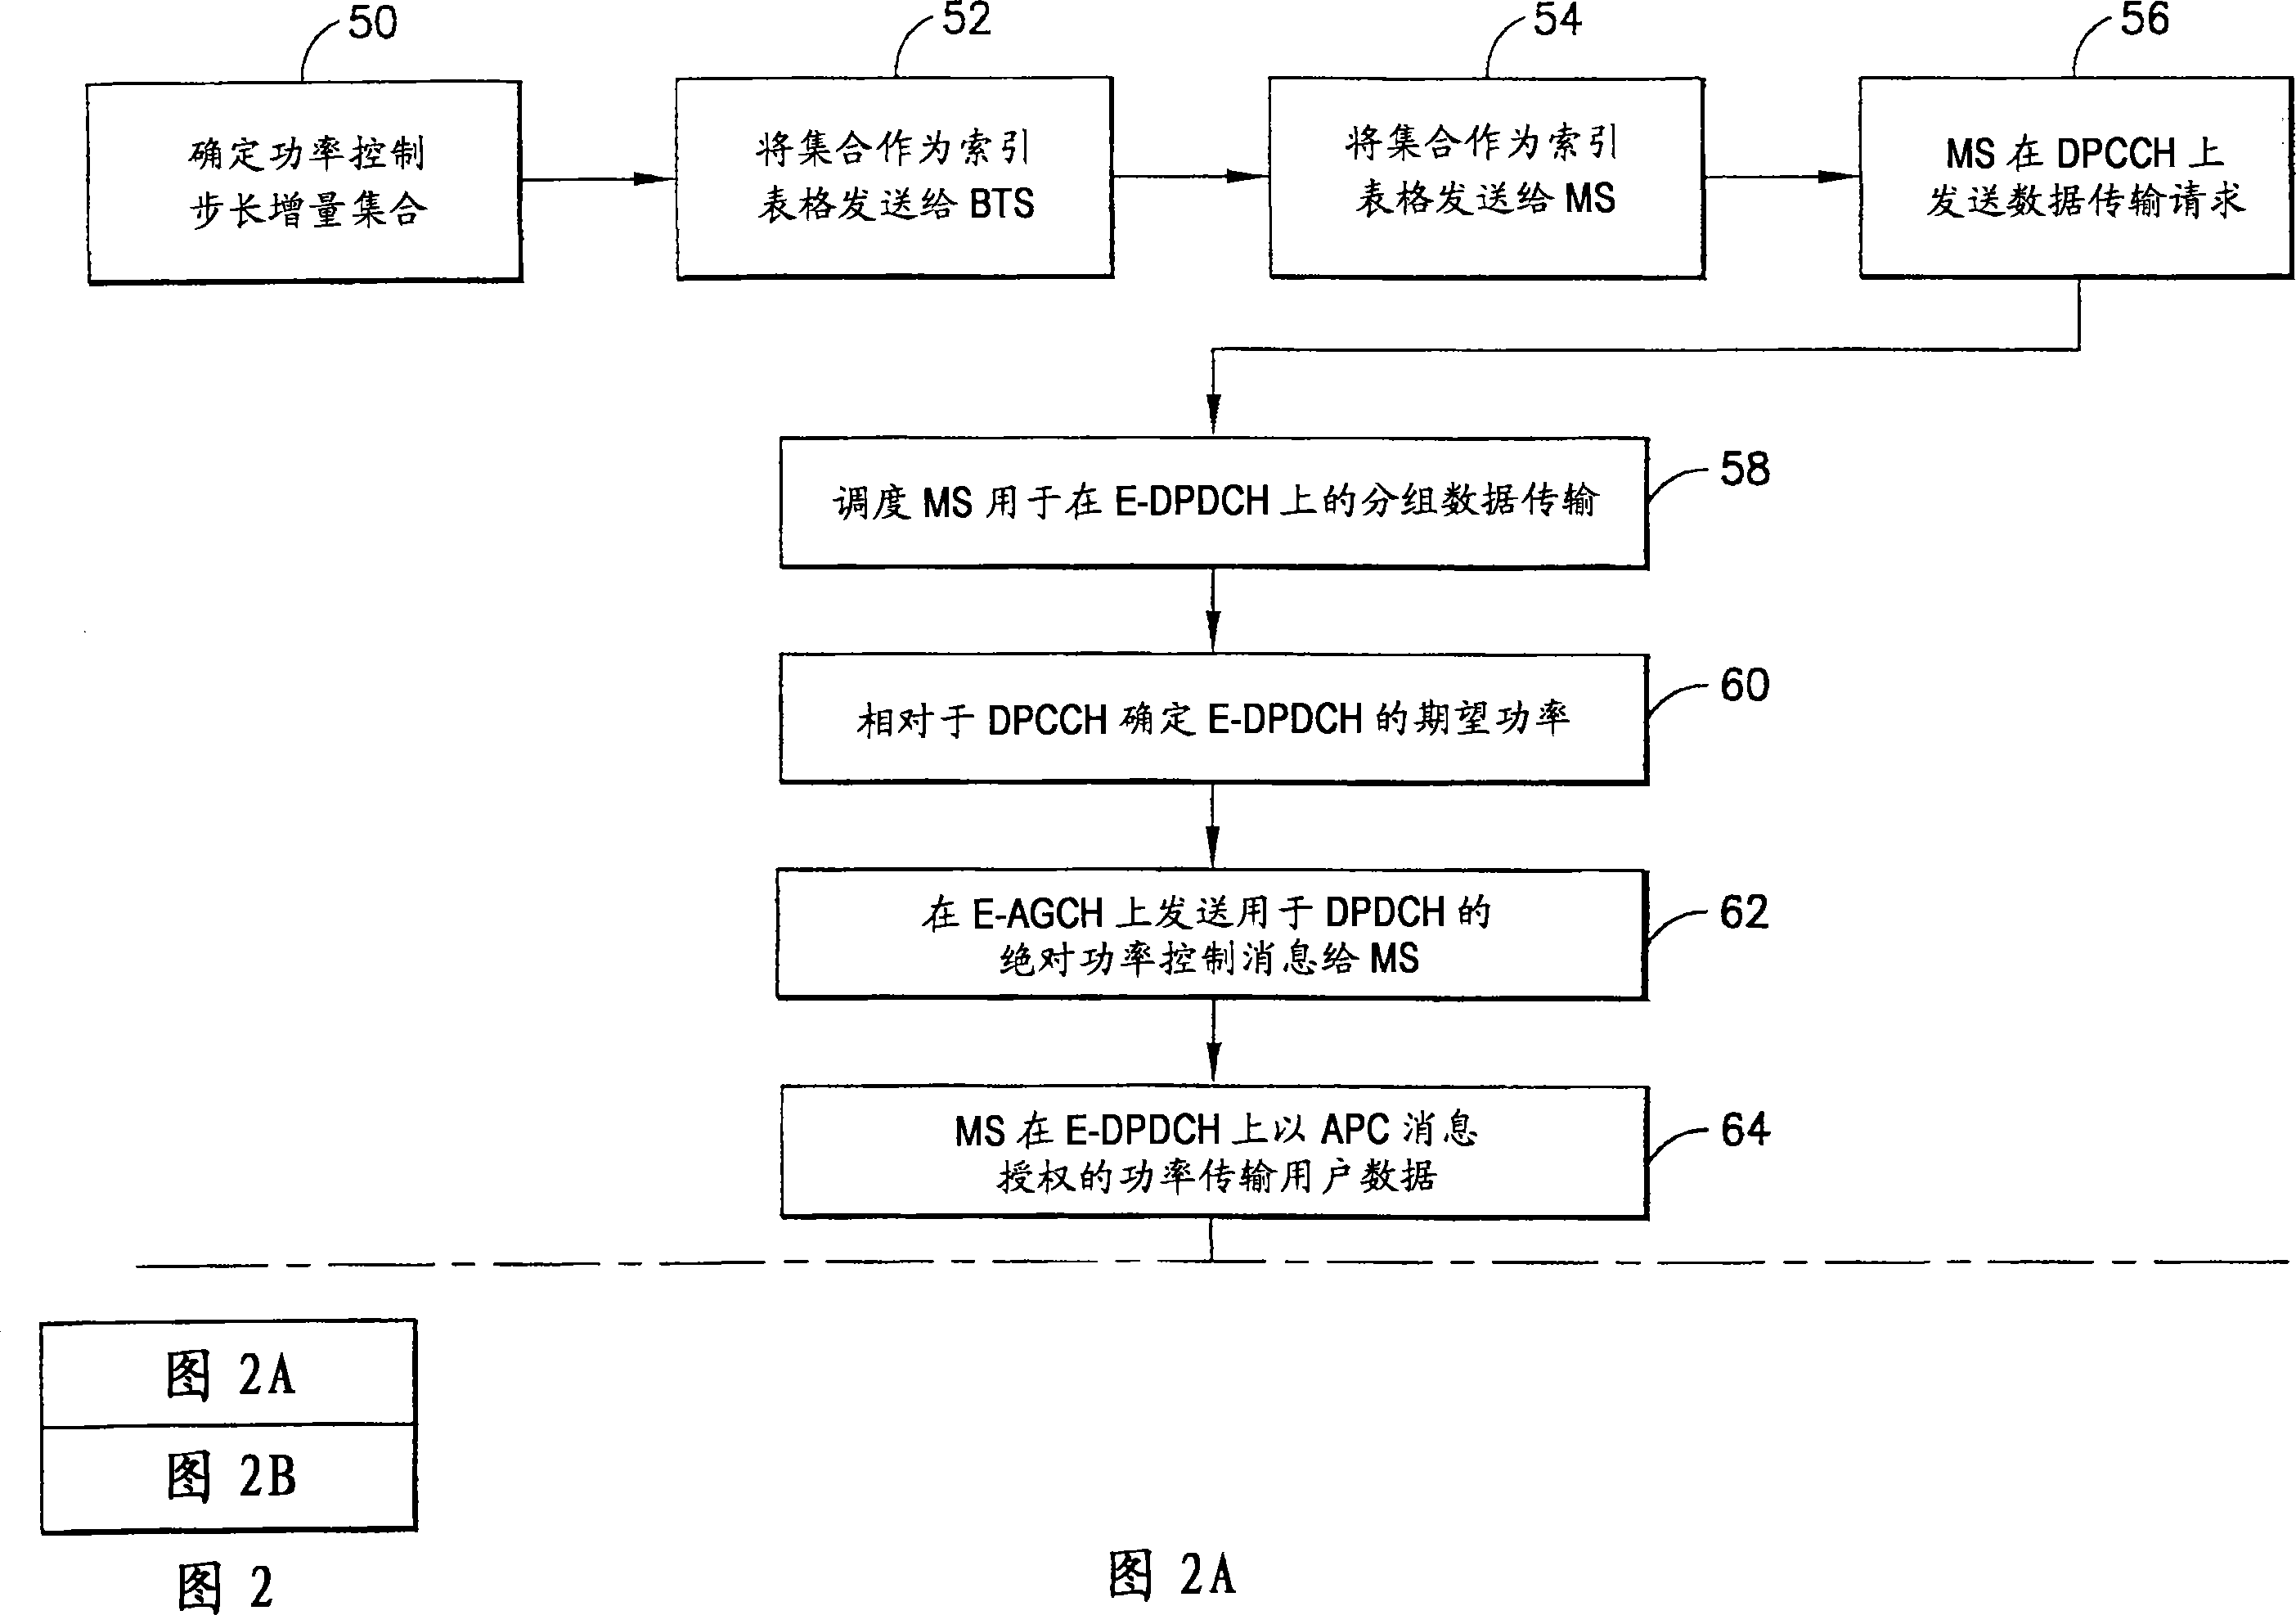 Variable power control step sizes for high speed uplink packet access (HSUPA)